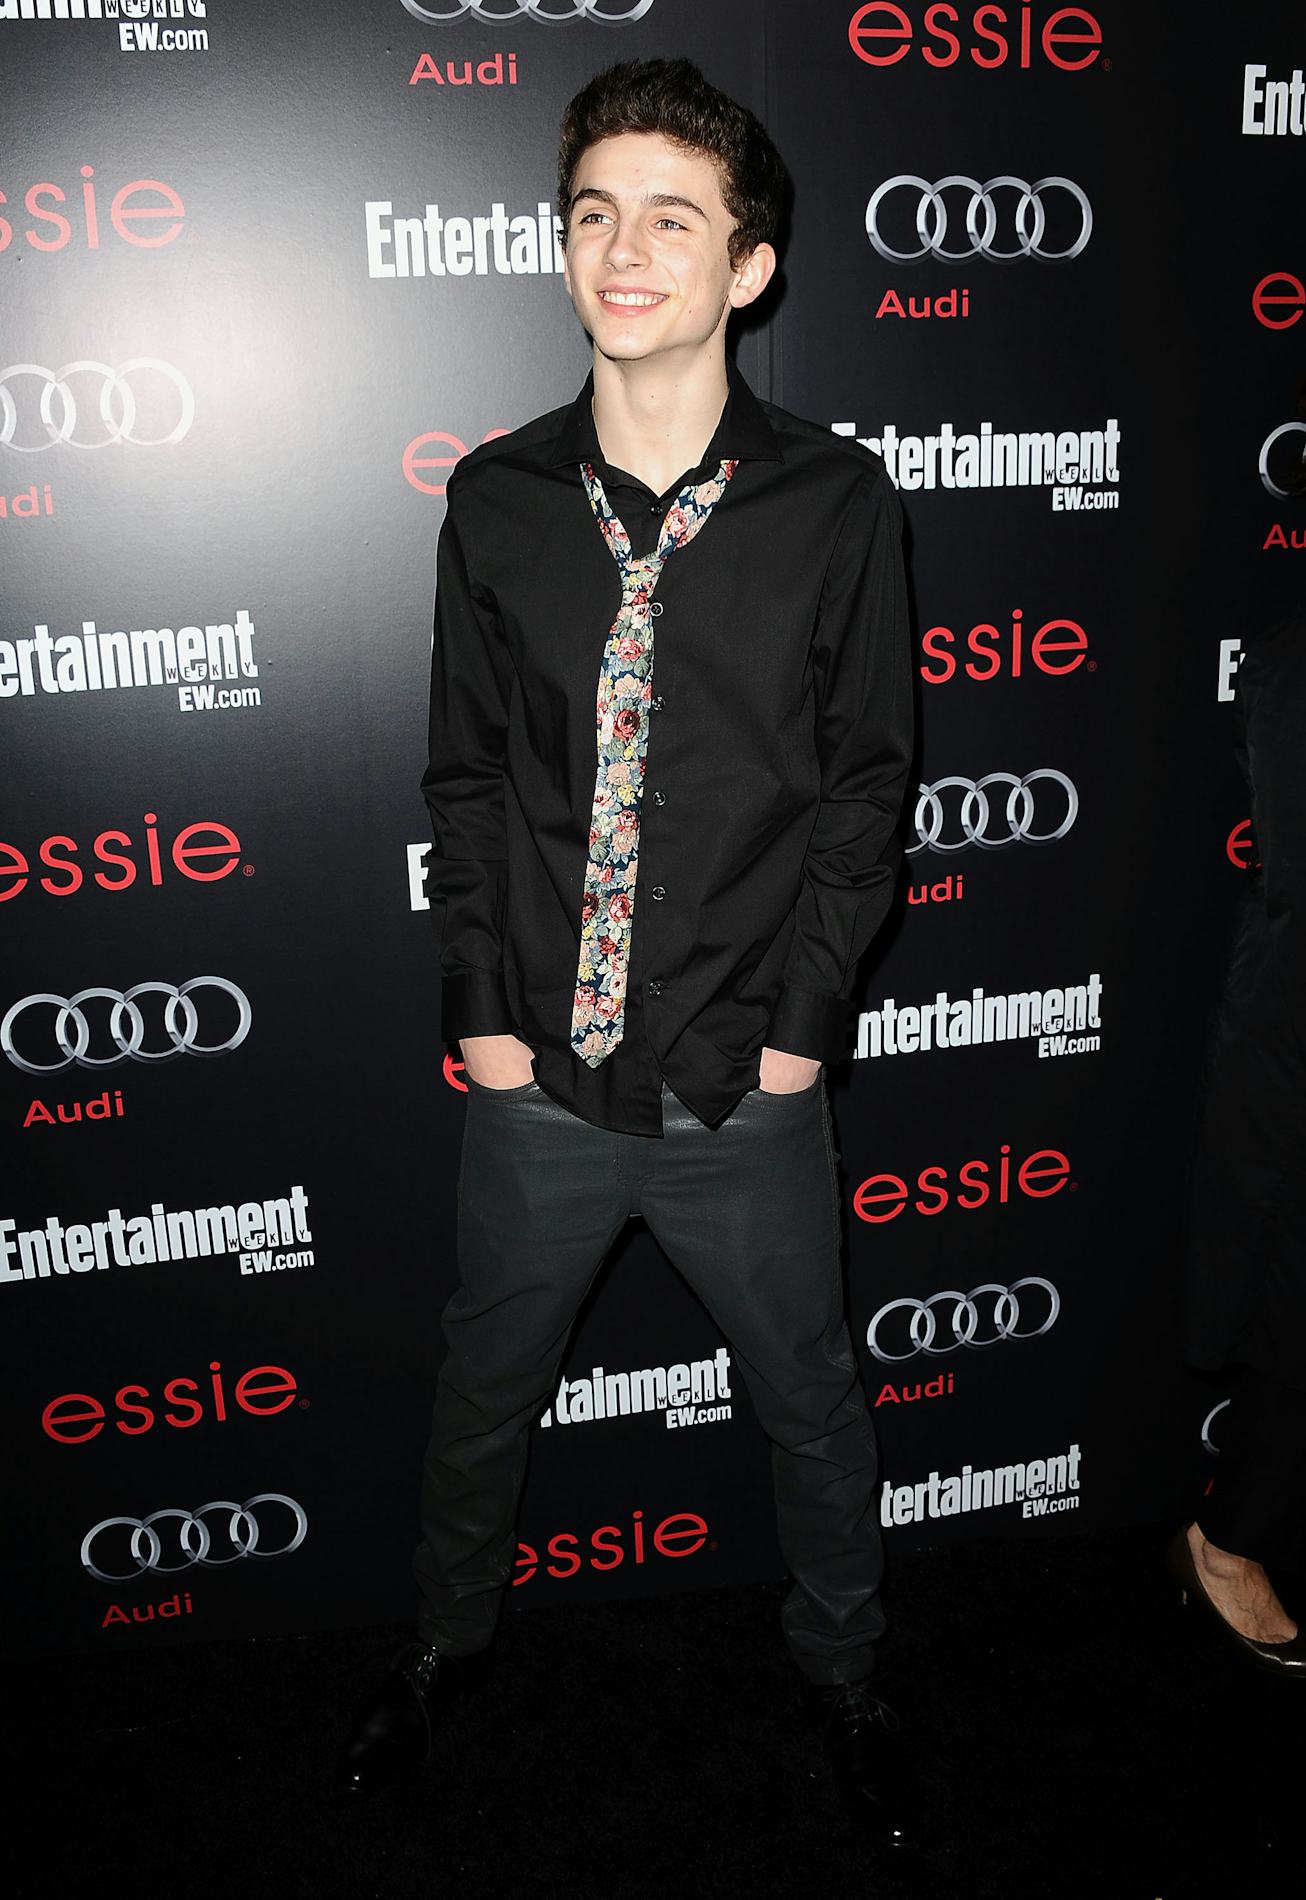 Timothee Chalamet at the Entertainment Weekly pre-SAG Awards party in 2013.